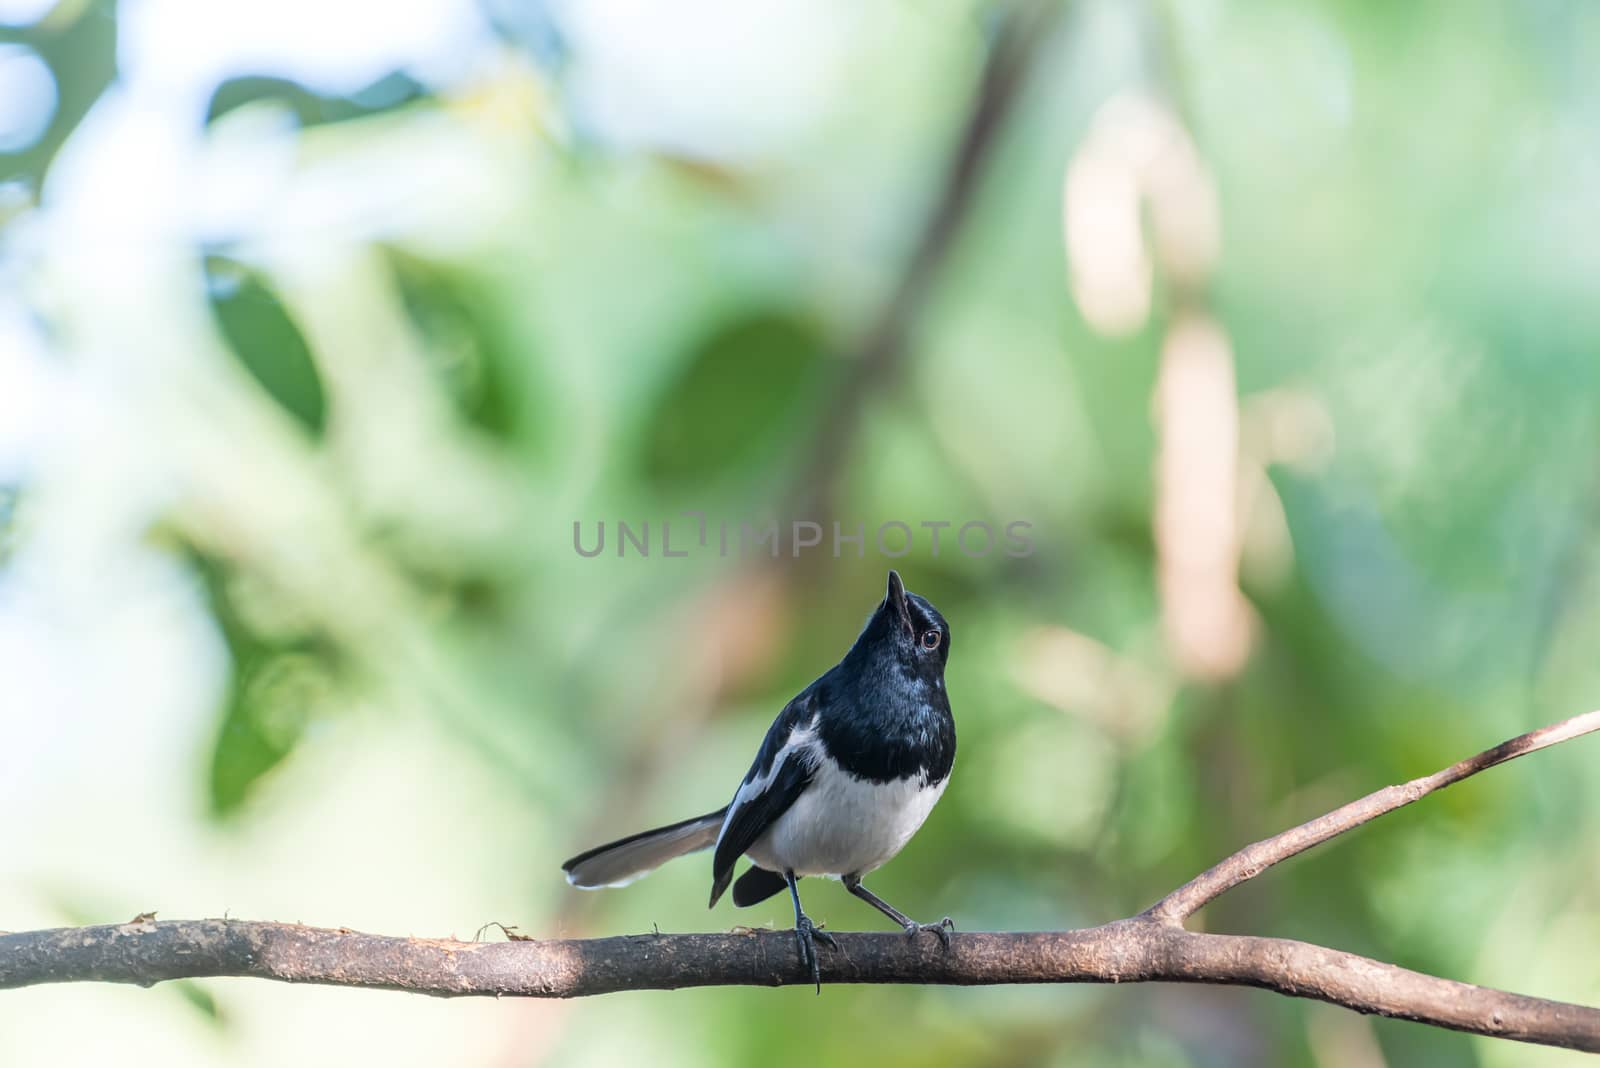 Bird (Oriental magpie-robin or Copsychus saularis) male black and white color perched on a tree in a nature wild